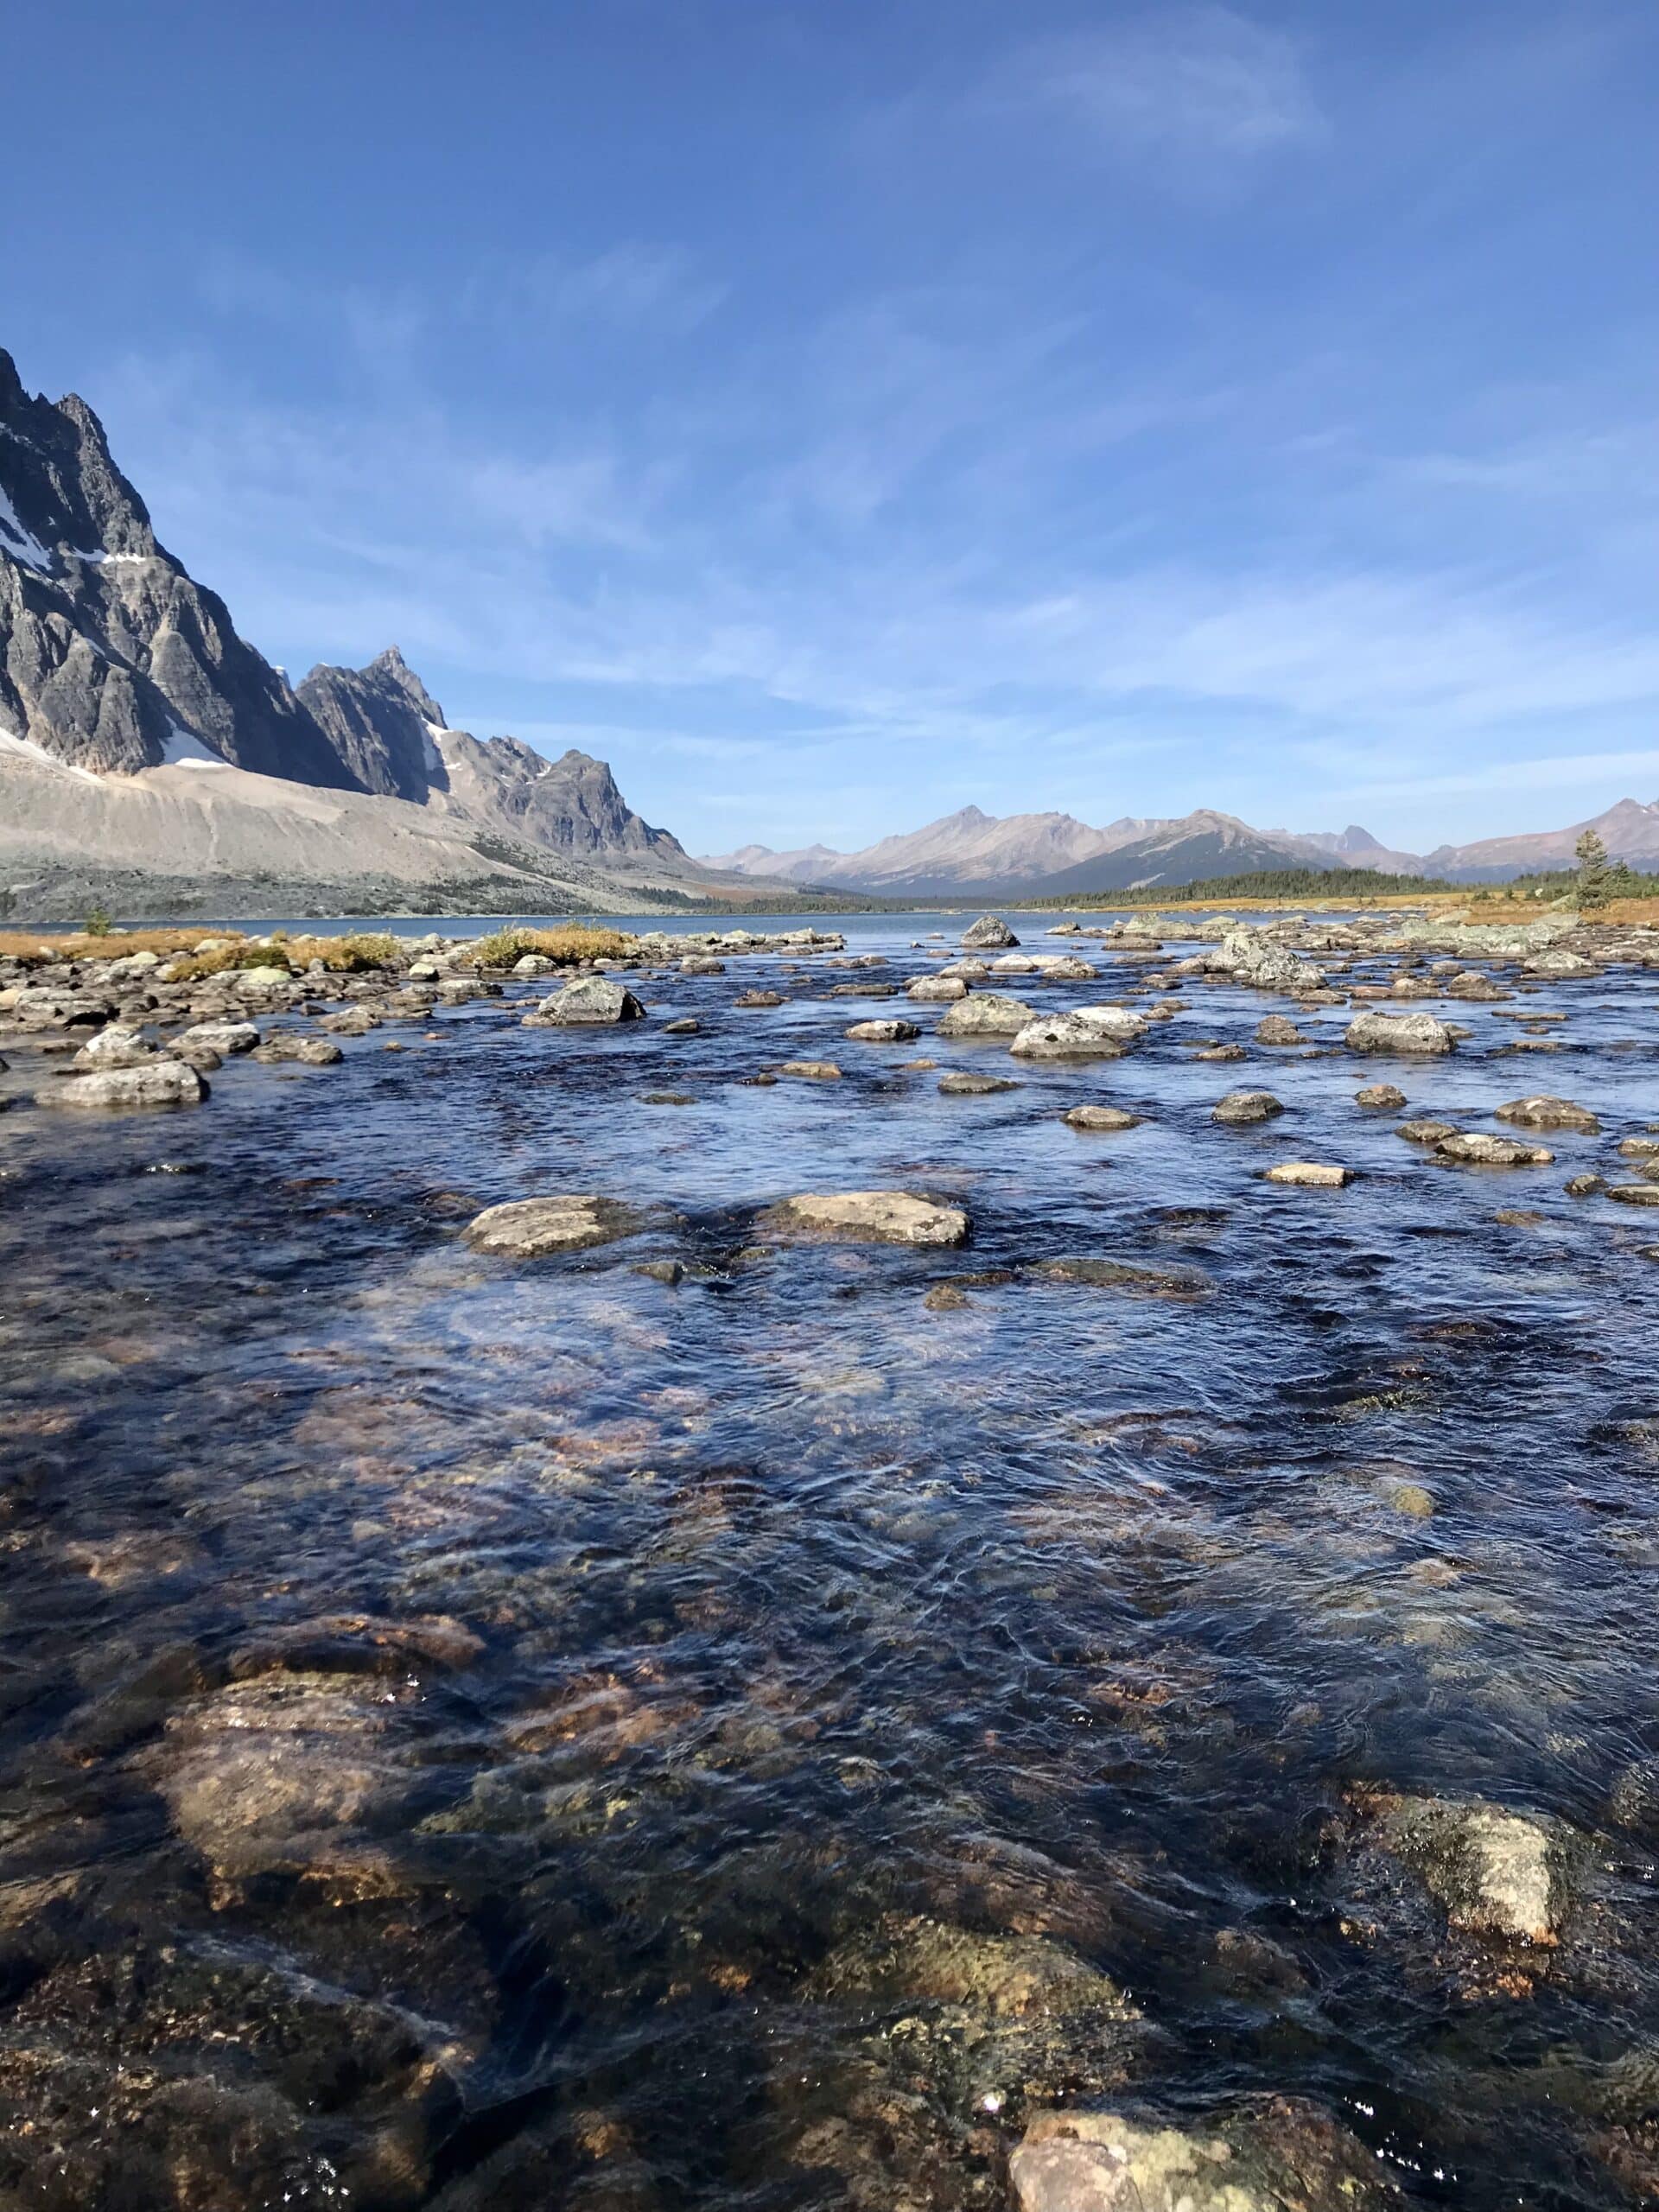 tonquin valley, river flowing rocks and moutains in background